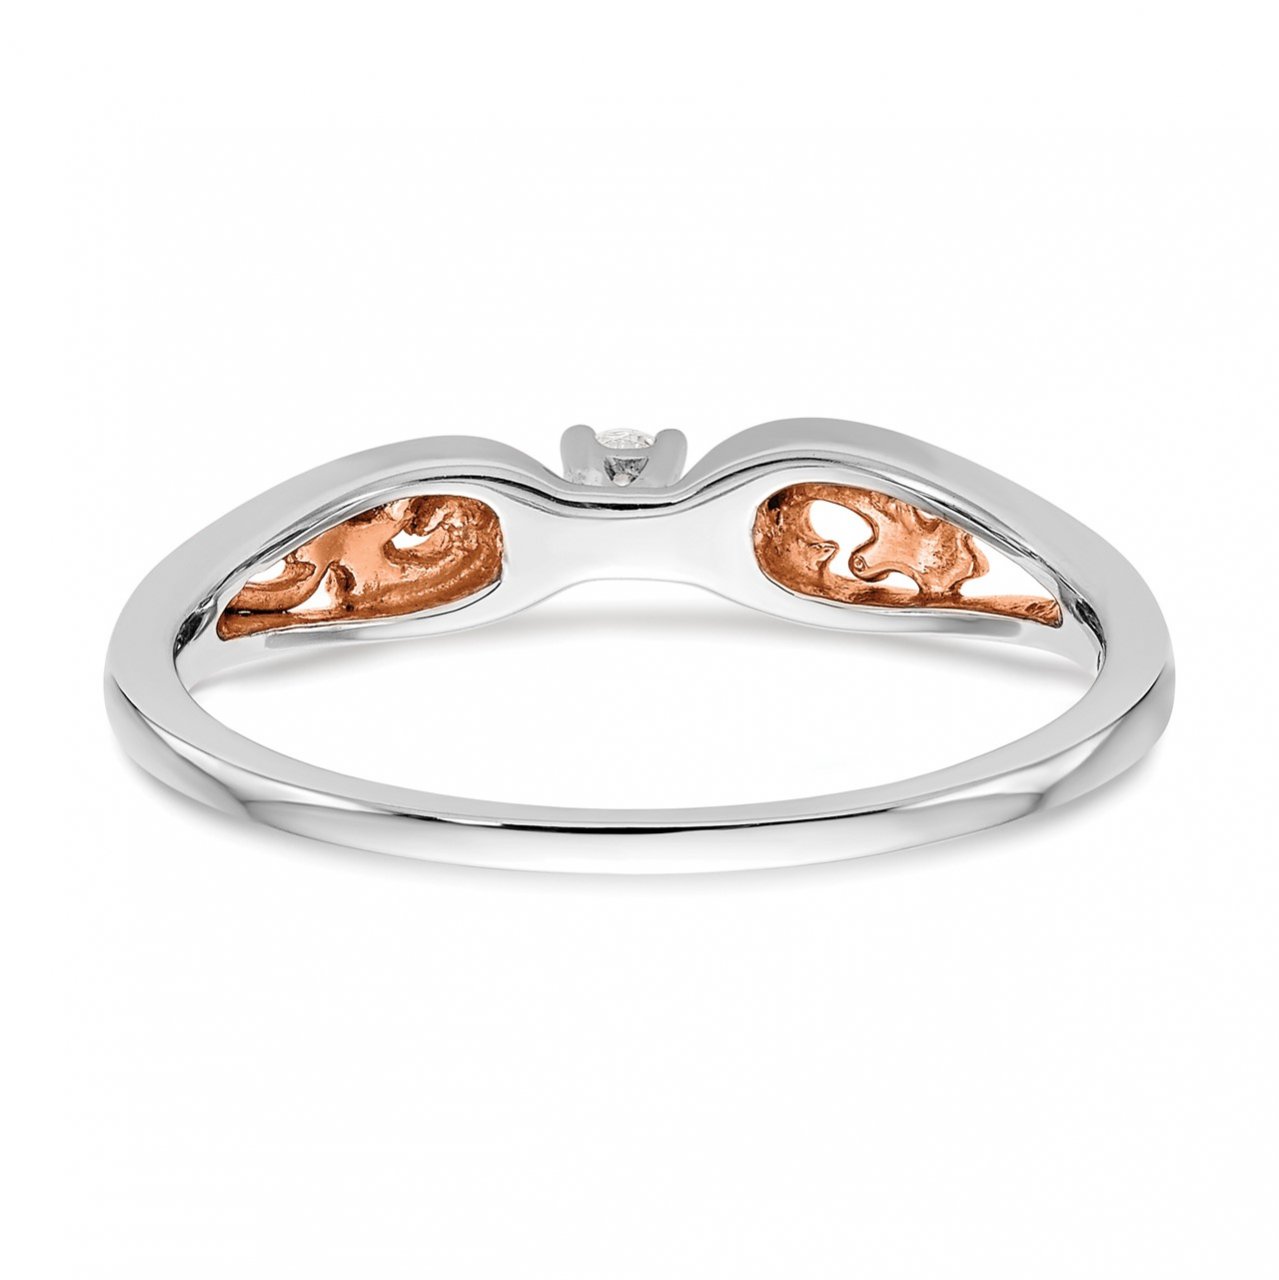 14K White Gold and Rose Gold Comp. Diamond Promise/Engagement Ring-4